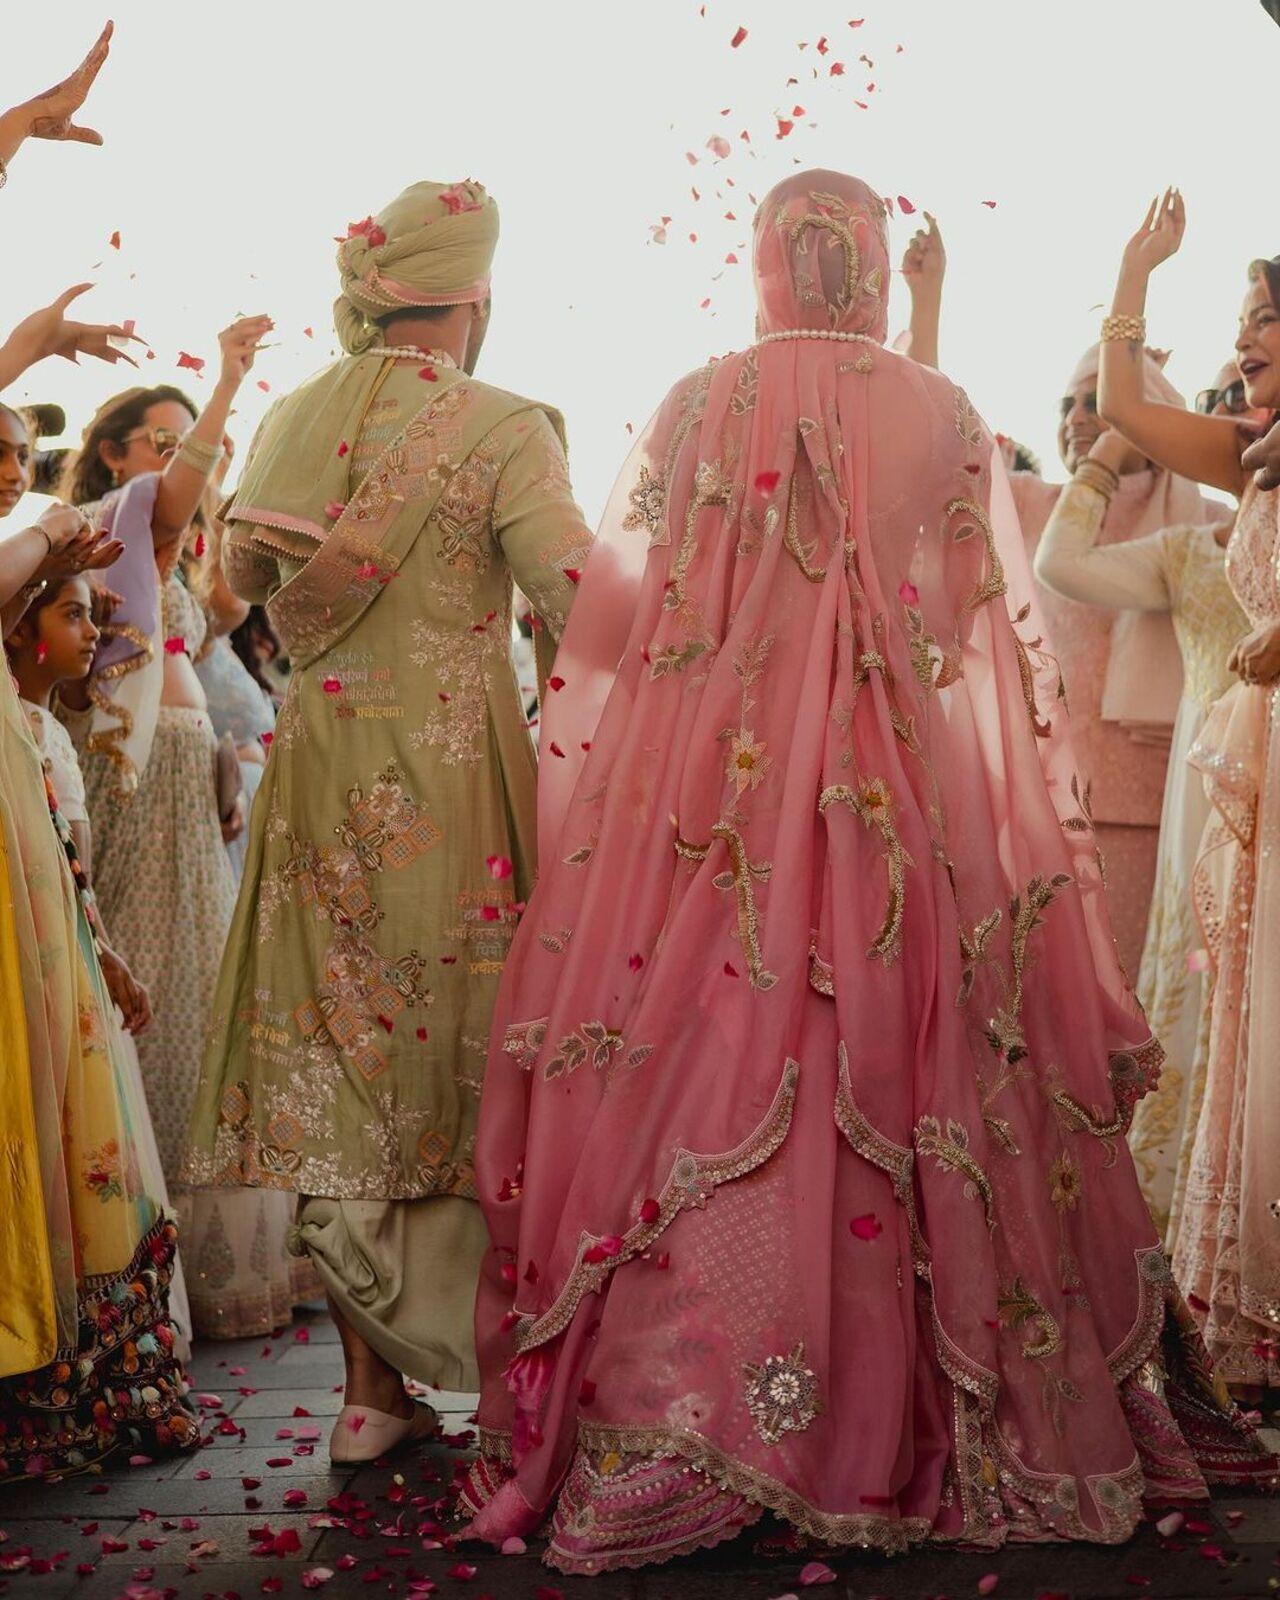 On their wedding day, Kriti wore a stunning pink lehenga while Pulkit complemented the actress in a green sherwani